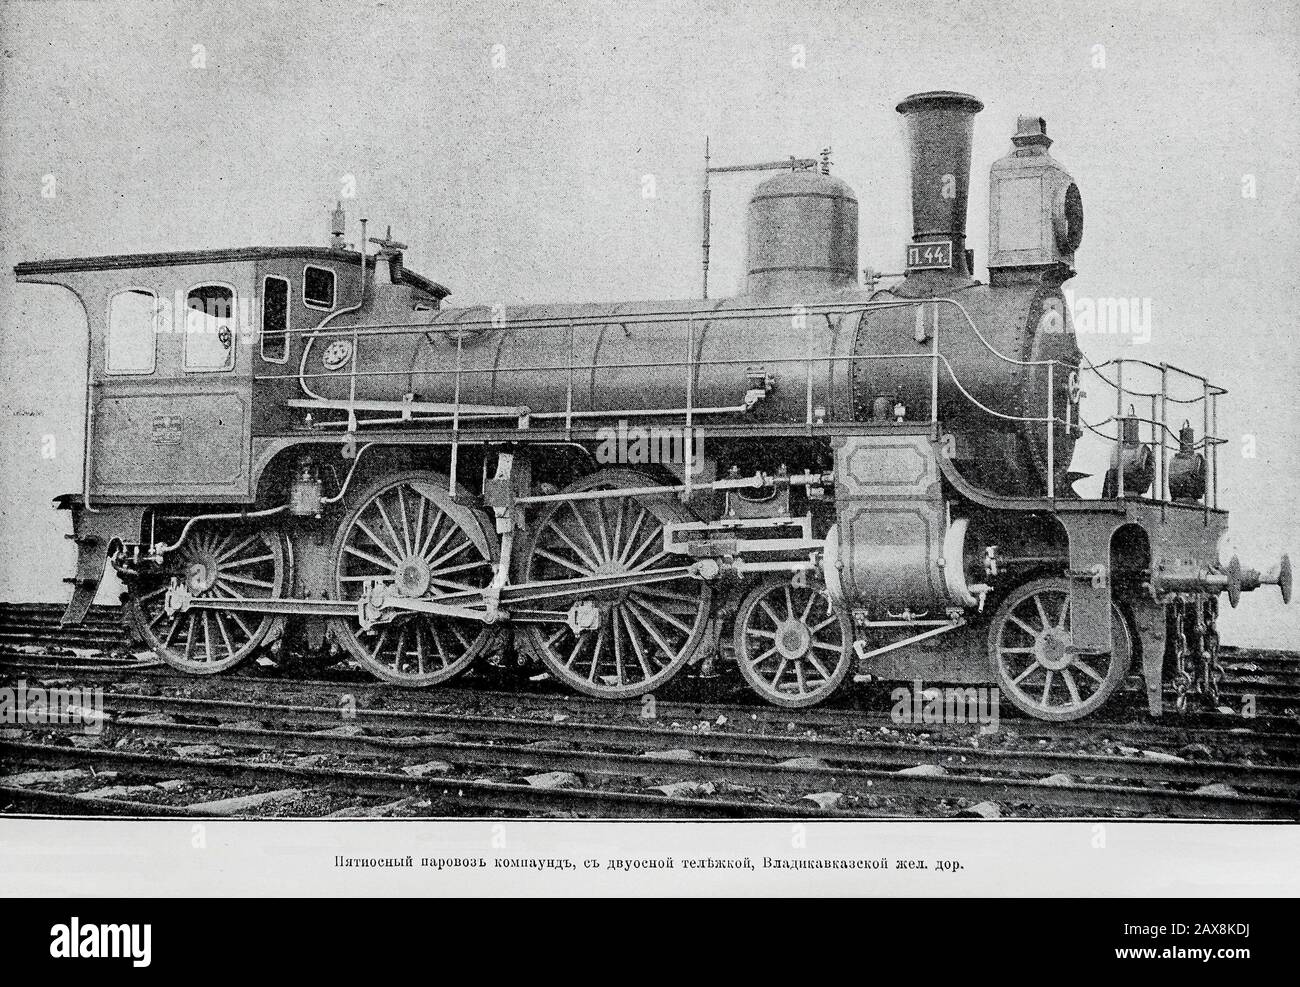 Five-axis steam locomotive with a biaxial truck of the Vladikavkaz railway. Engraving of the 19th century. Stock Photo